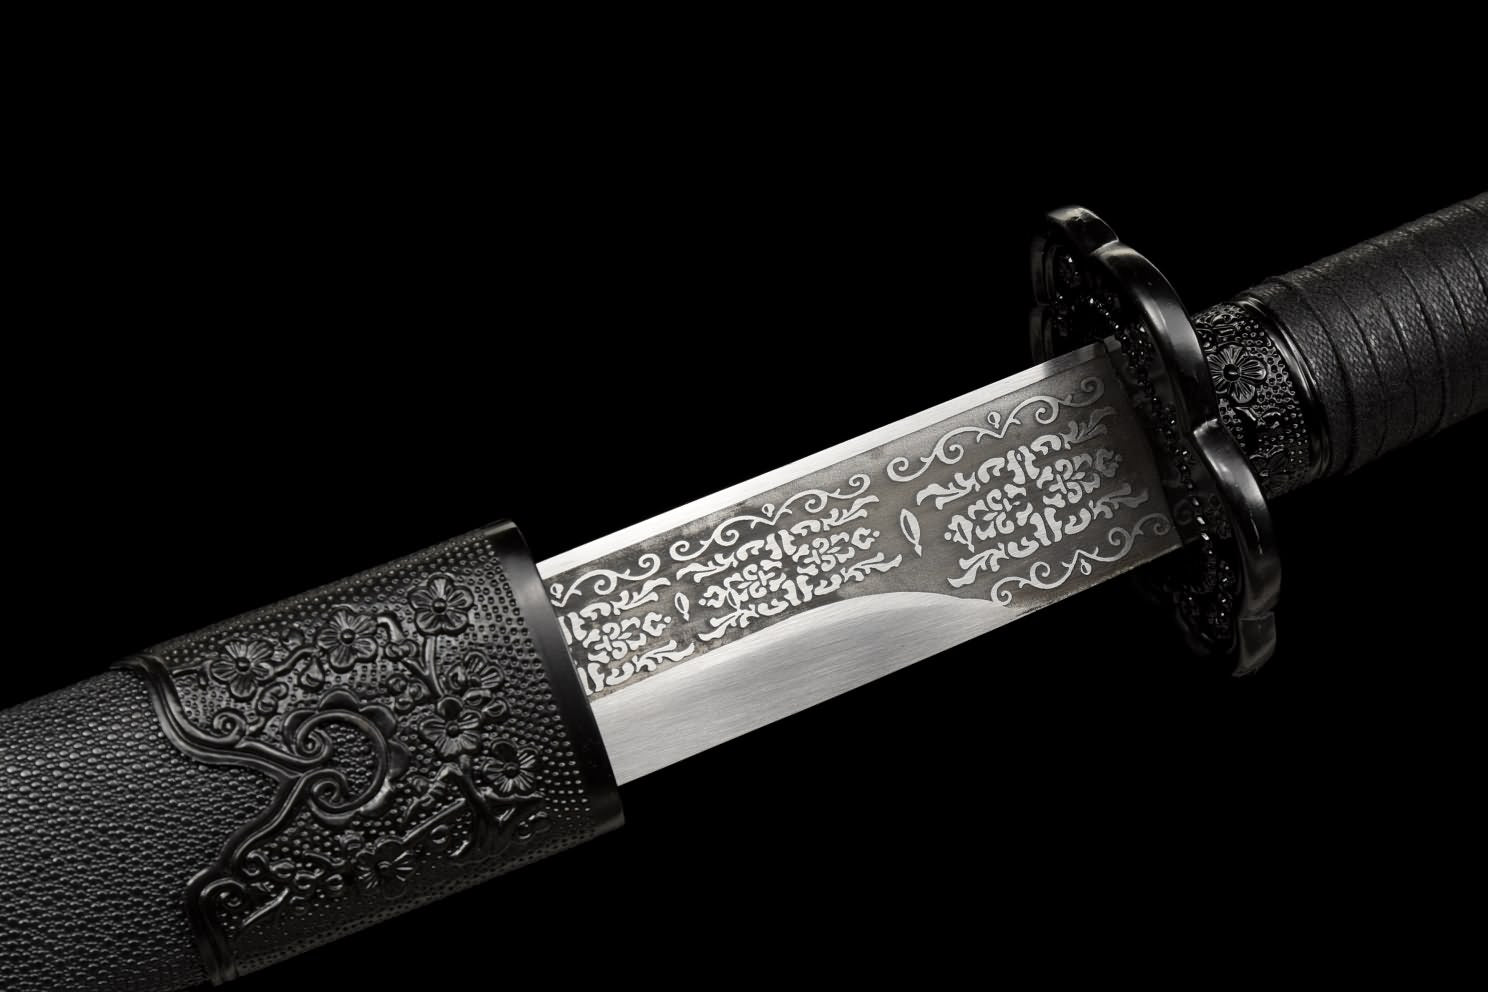 Qing dao Swords Real,Hand Forged High Carbon Steel Etched Blade,Alloy Fittings